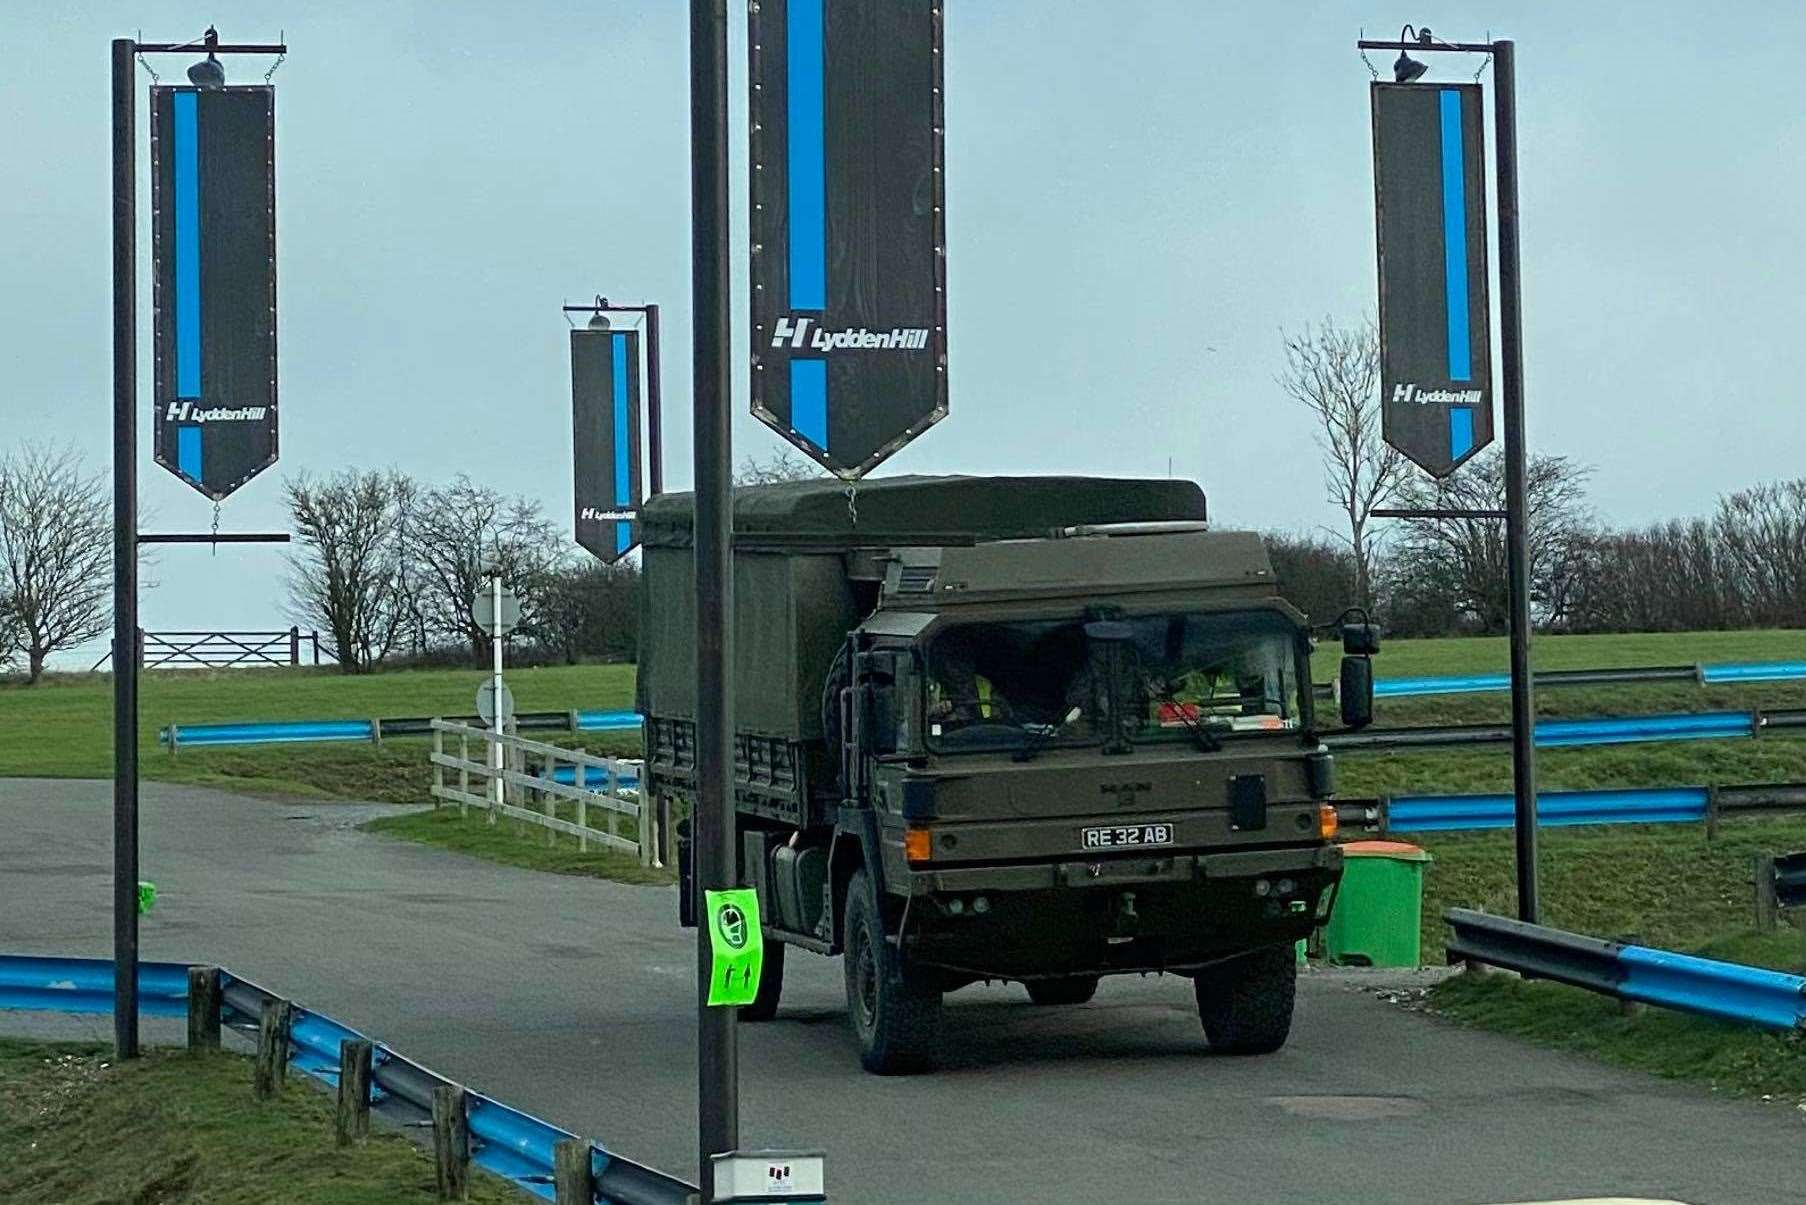 The Army arrived at Lydden this morning